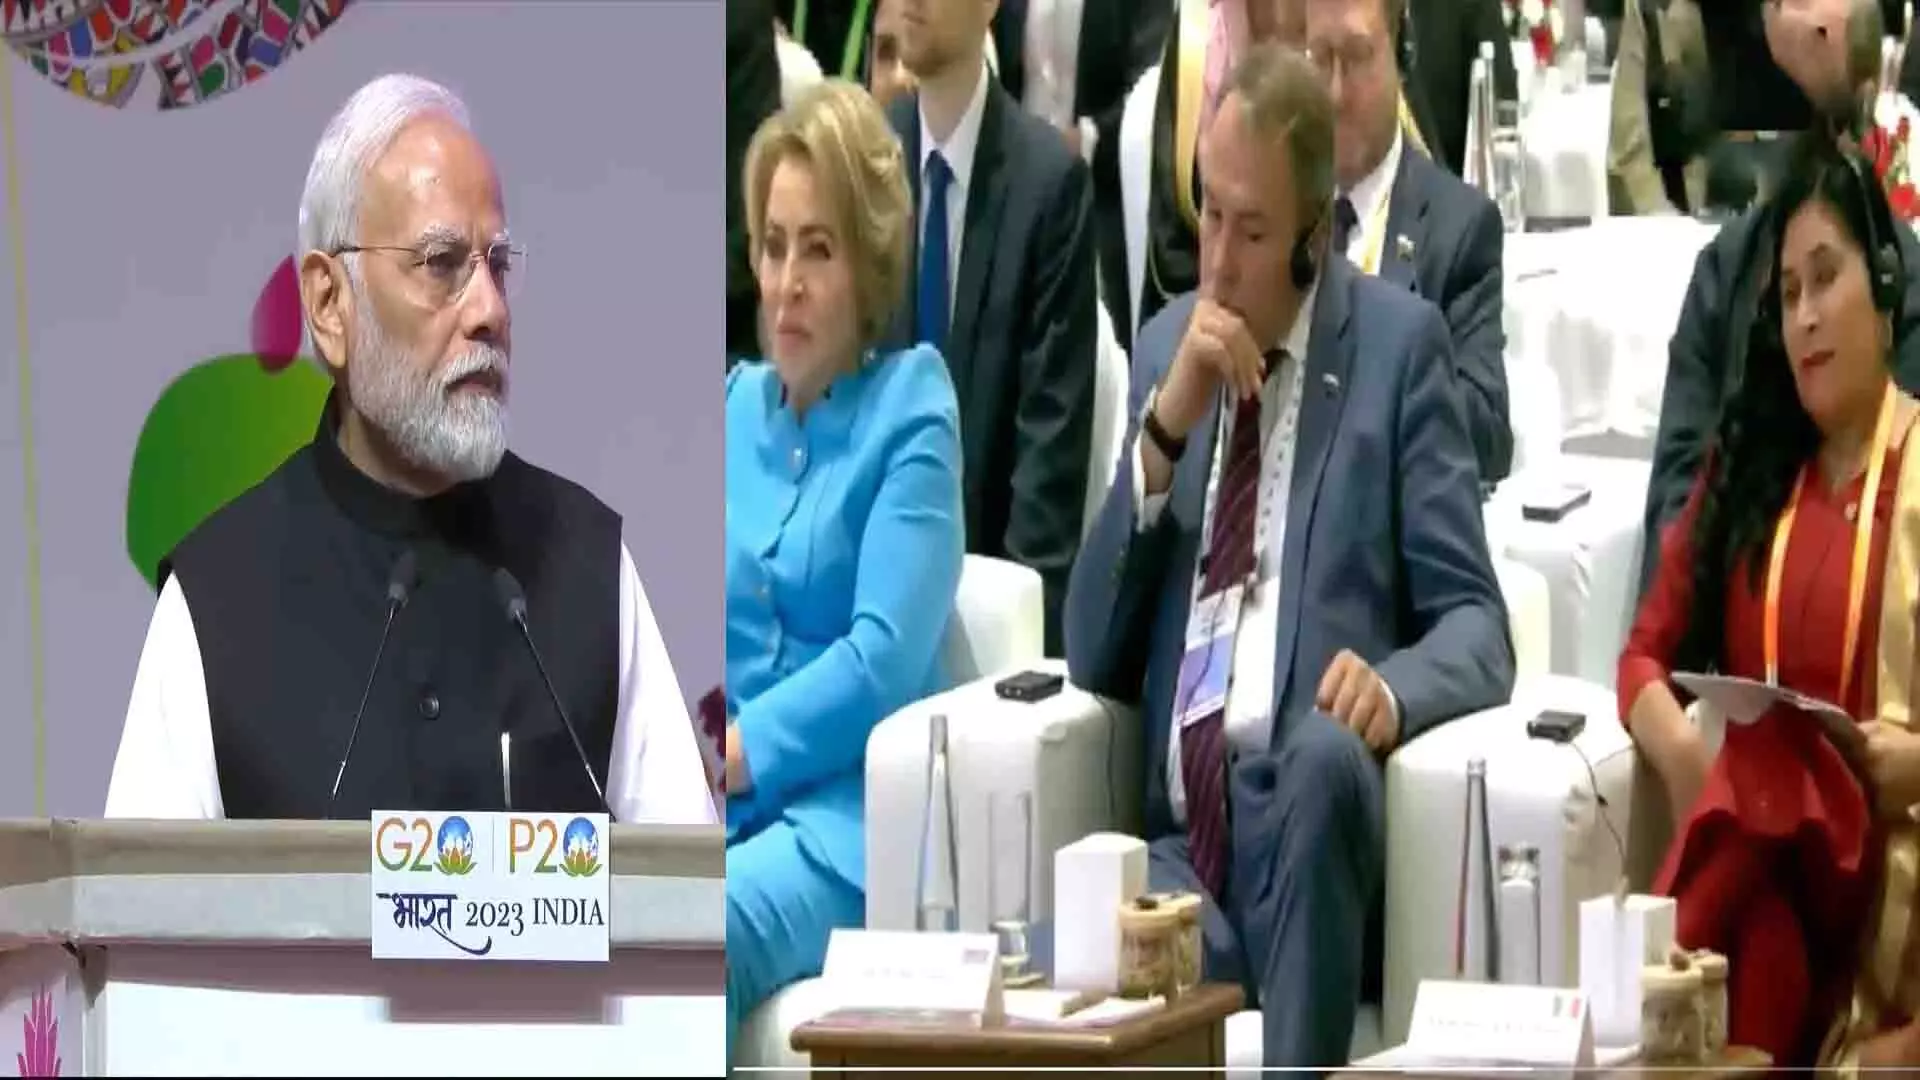 PM Modi addressed the inauguration ceremony of P-20 and said this big thing